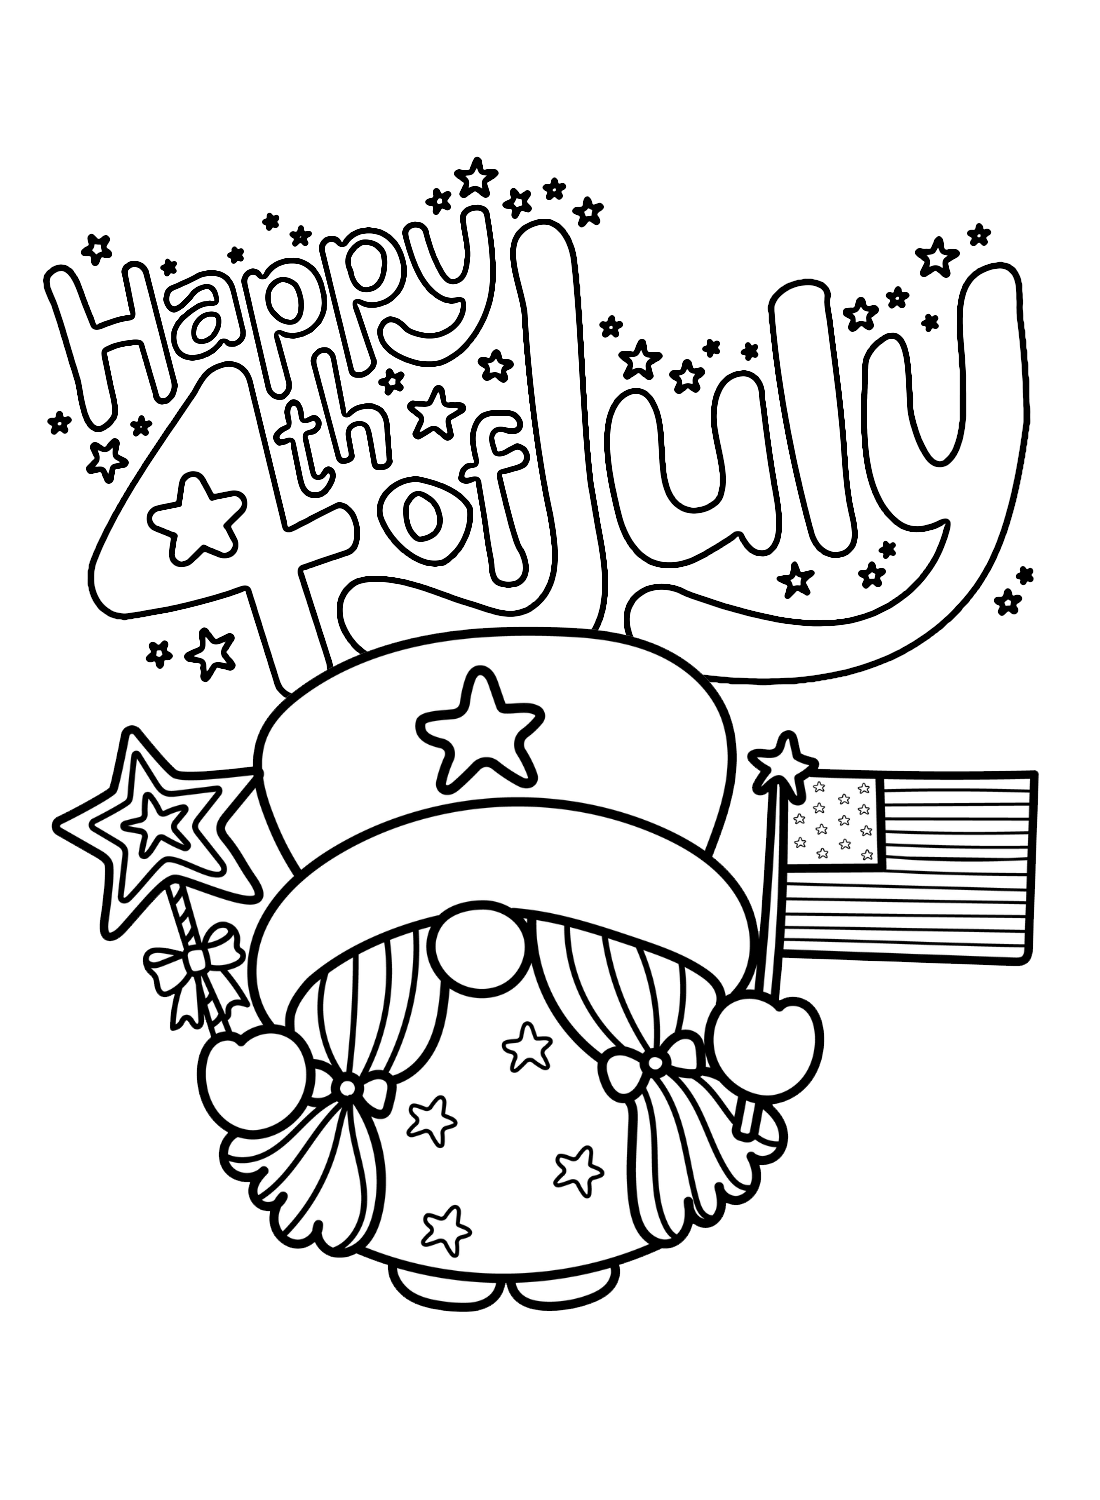 Happy 4th of July With Gnome Coloring Pages